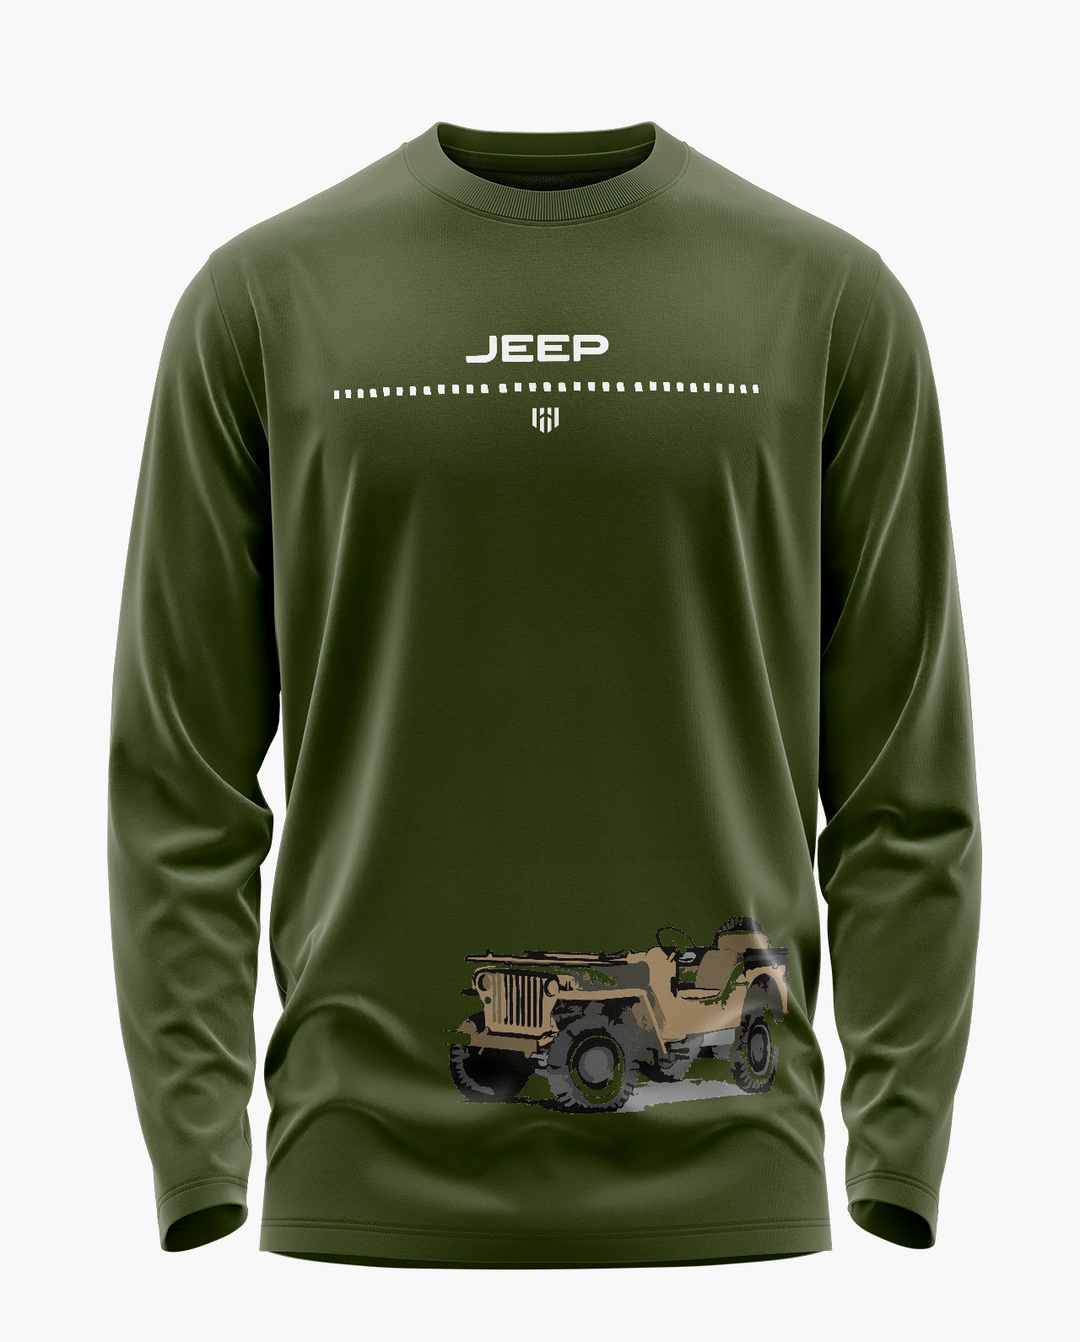 Willy's Jeep Full Sleeve T-Shirt - Aero Armour